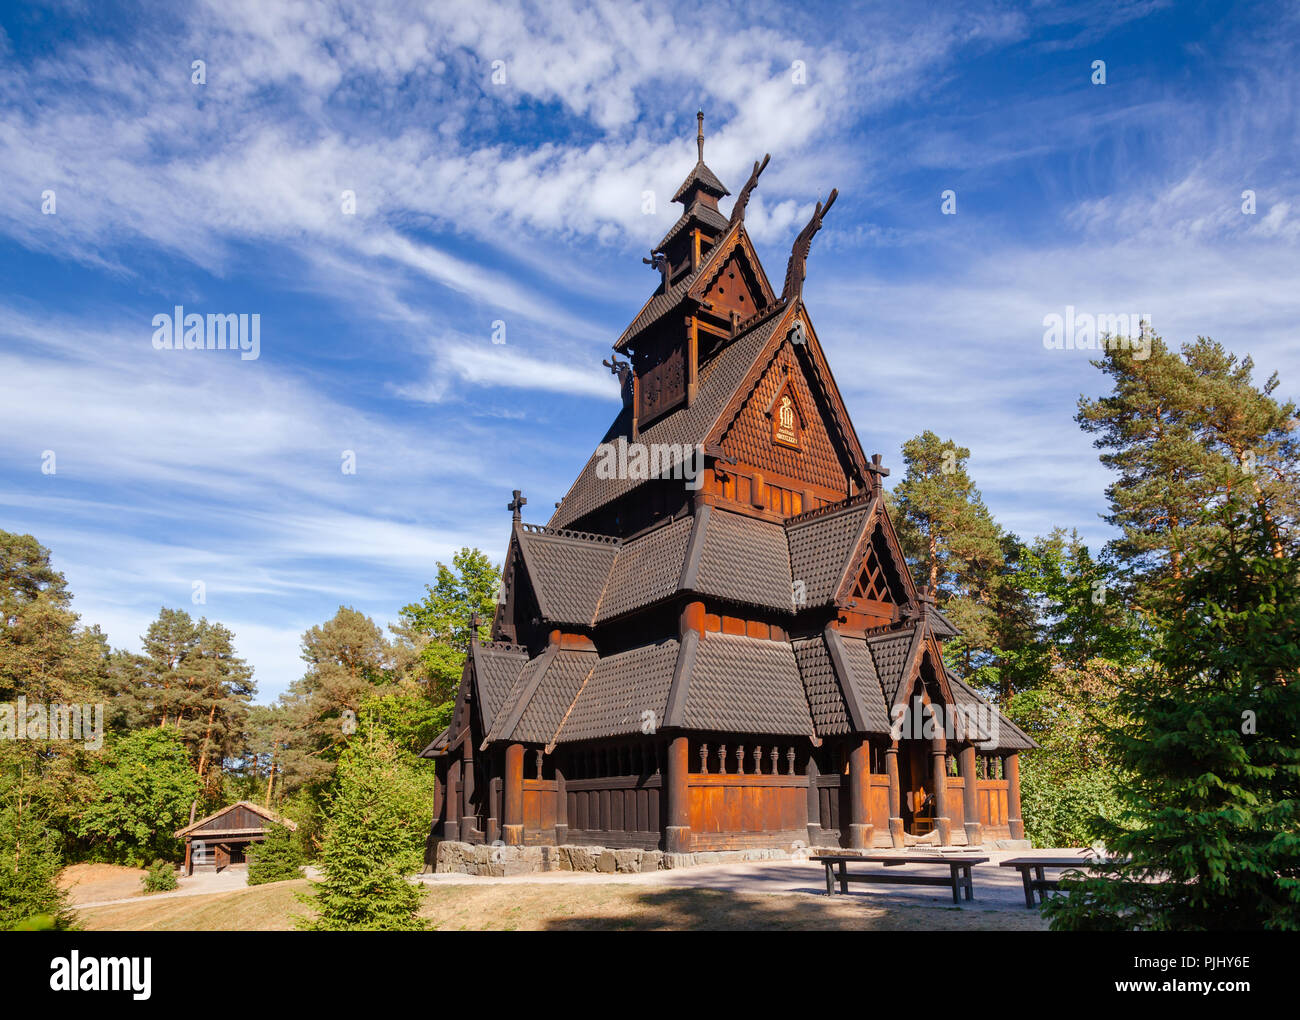 Reconstructed wooden Gol Stave Church (Gol Stavkyrkje) in Norwegian Museum of Cultural History at Bygdoy peninsula in Oslo, Norway, Scandanavia Stock Photo